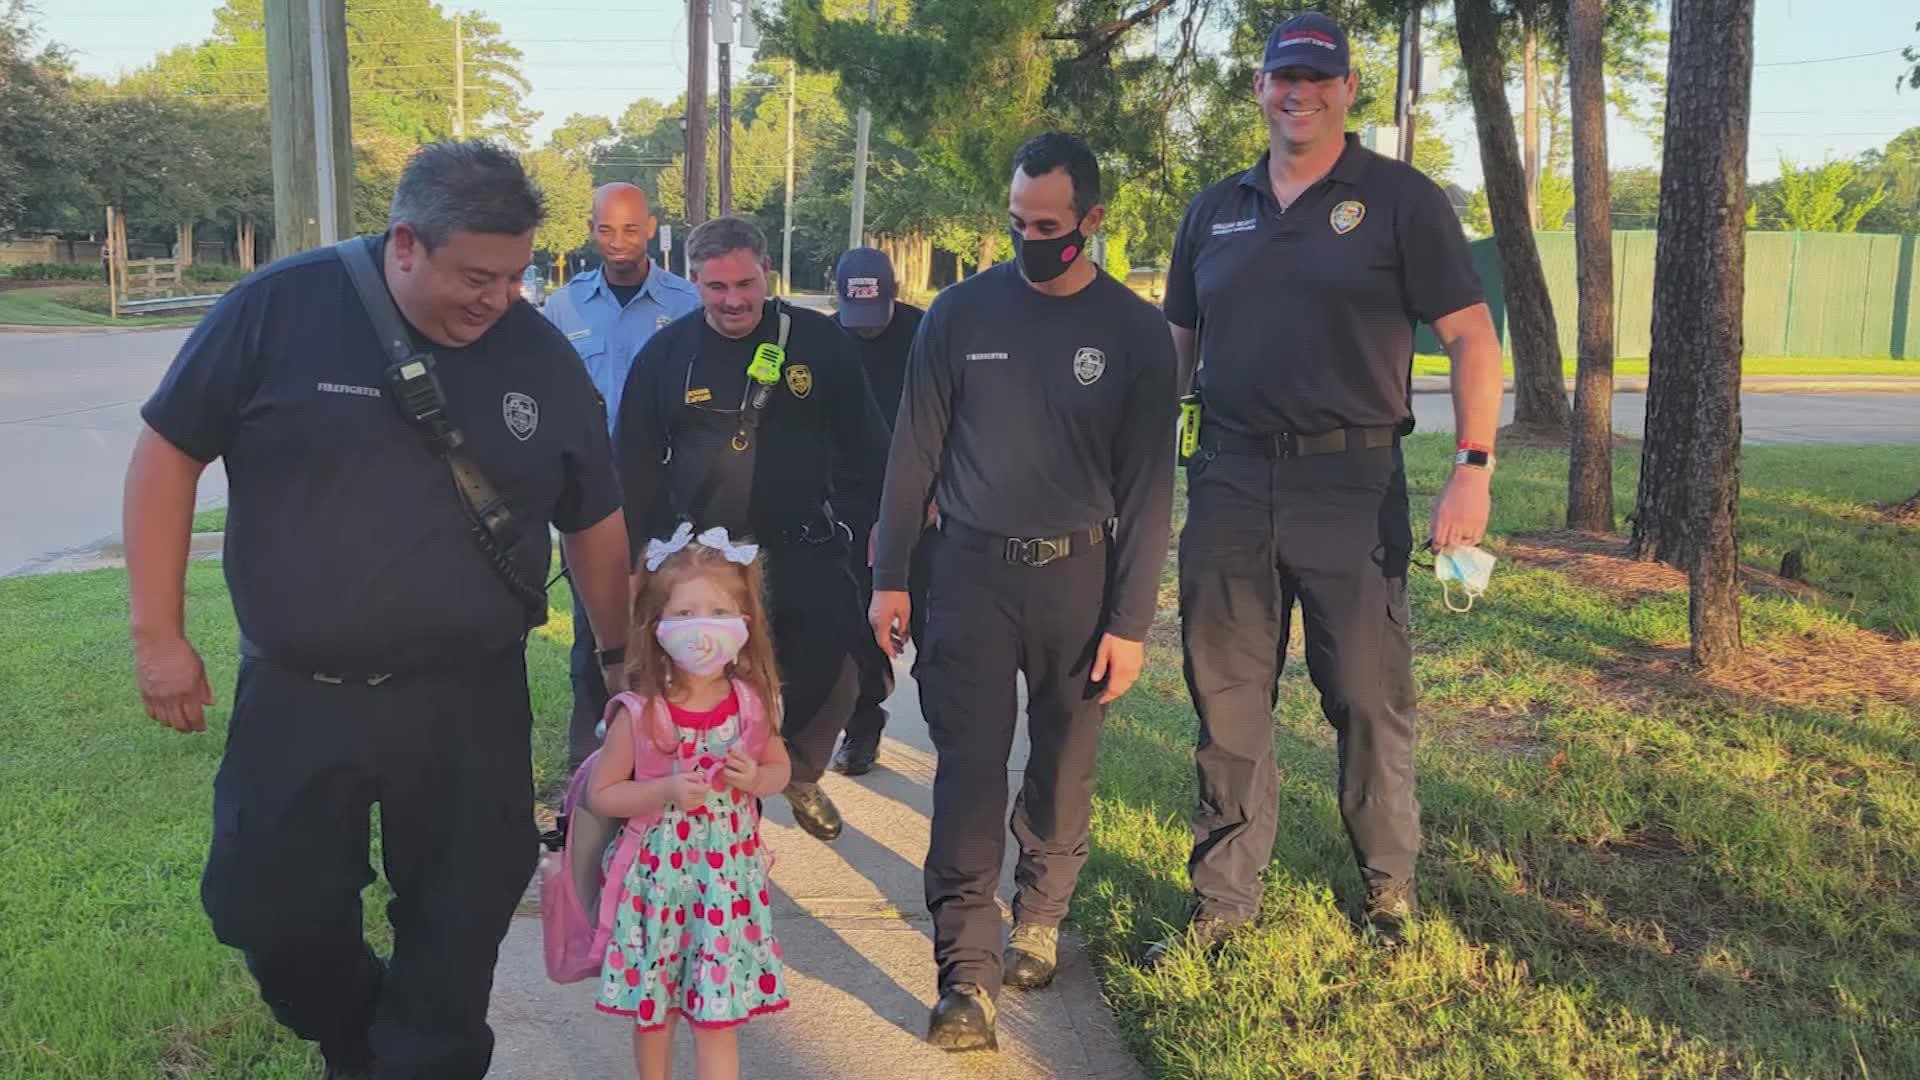 Firefighters stepped in for one of their own fighting COVID-19, escorting his daughter to her first day of kindergarten.